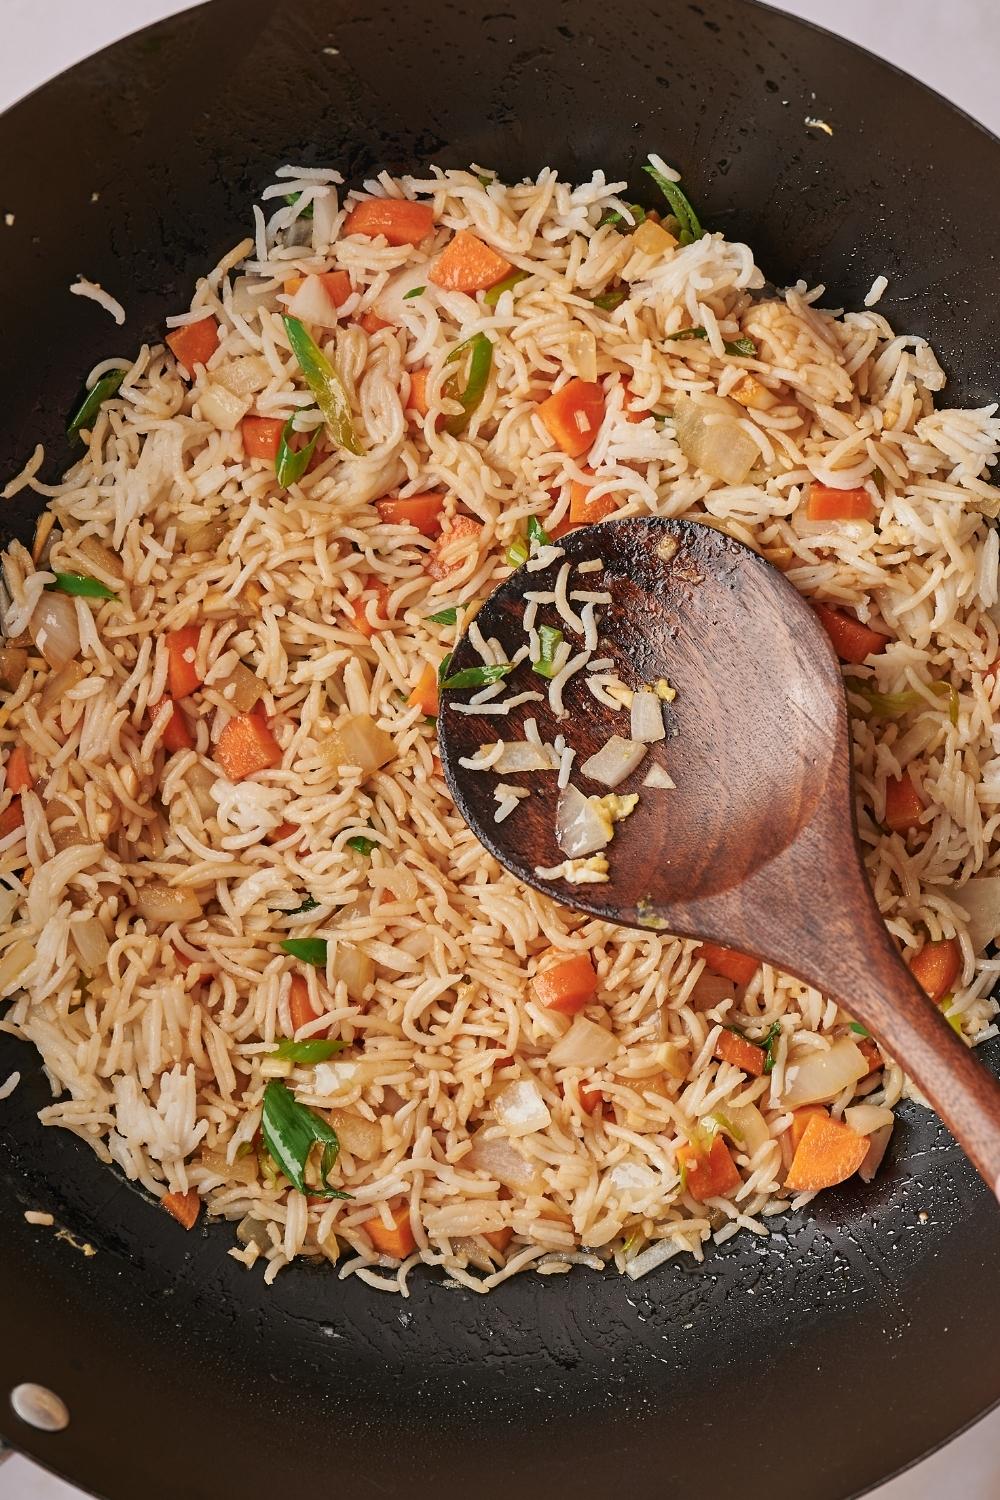 A wooden spoon in a wok that is filled with rice and veggies.